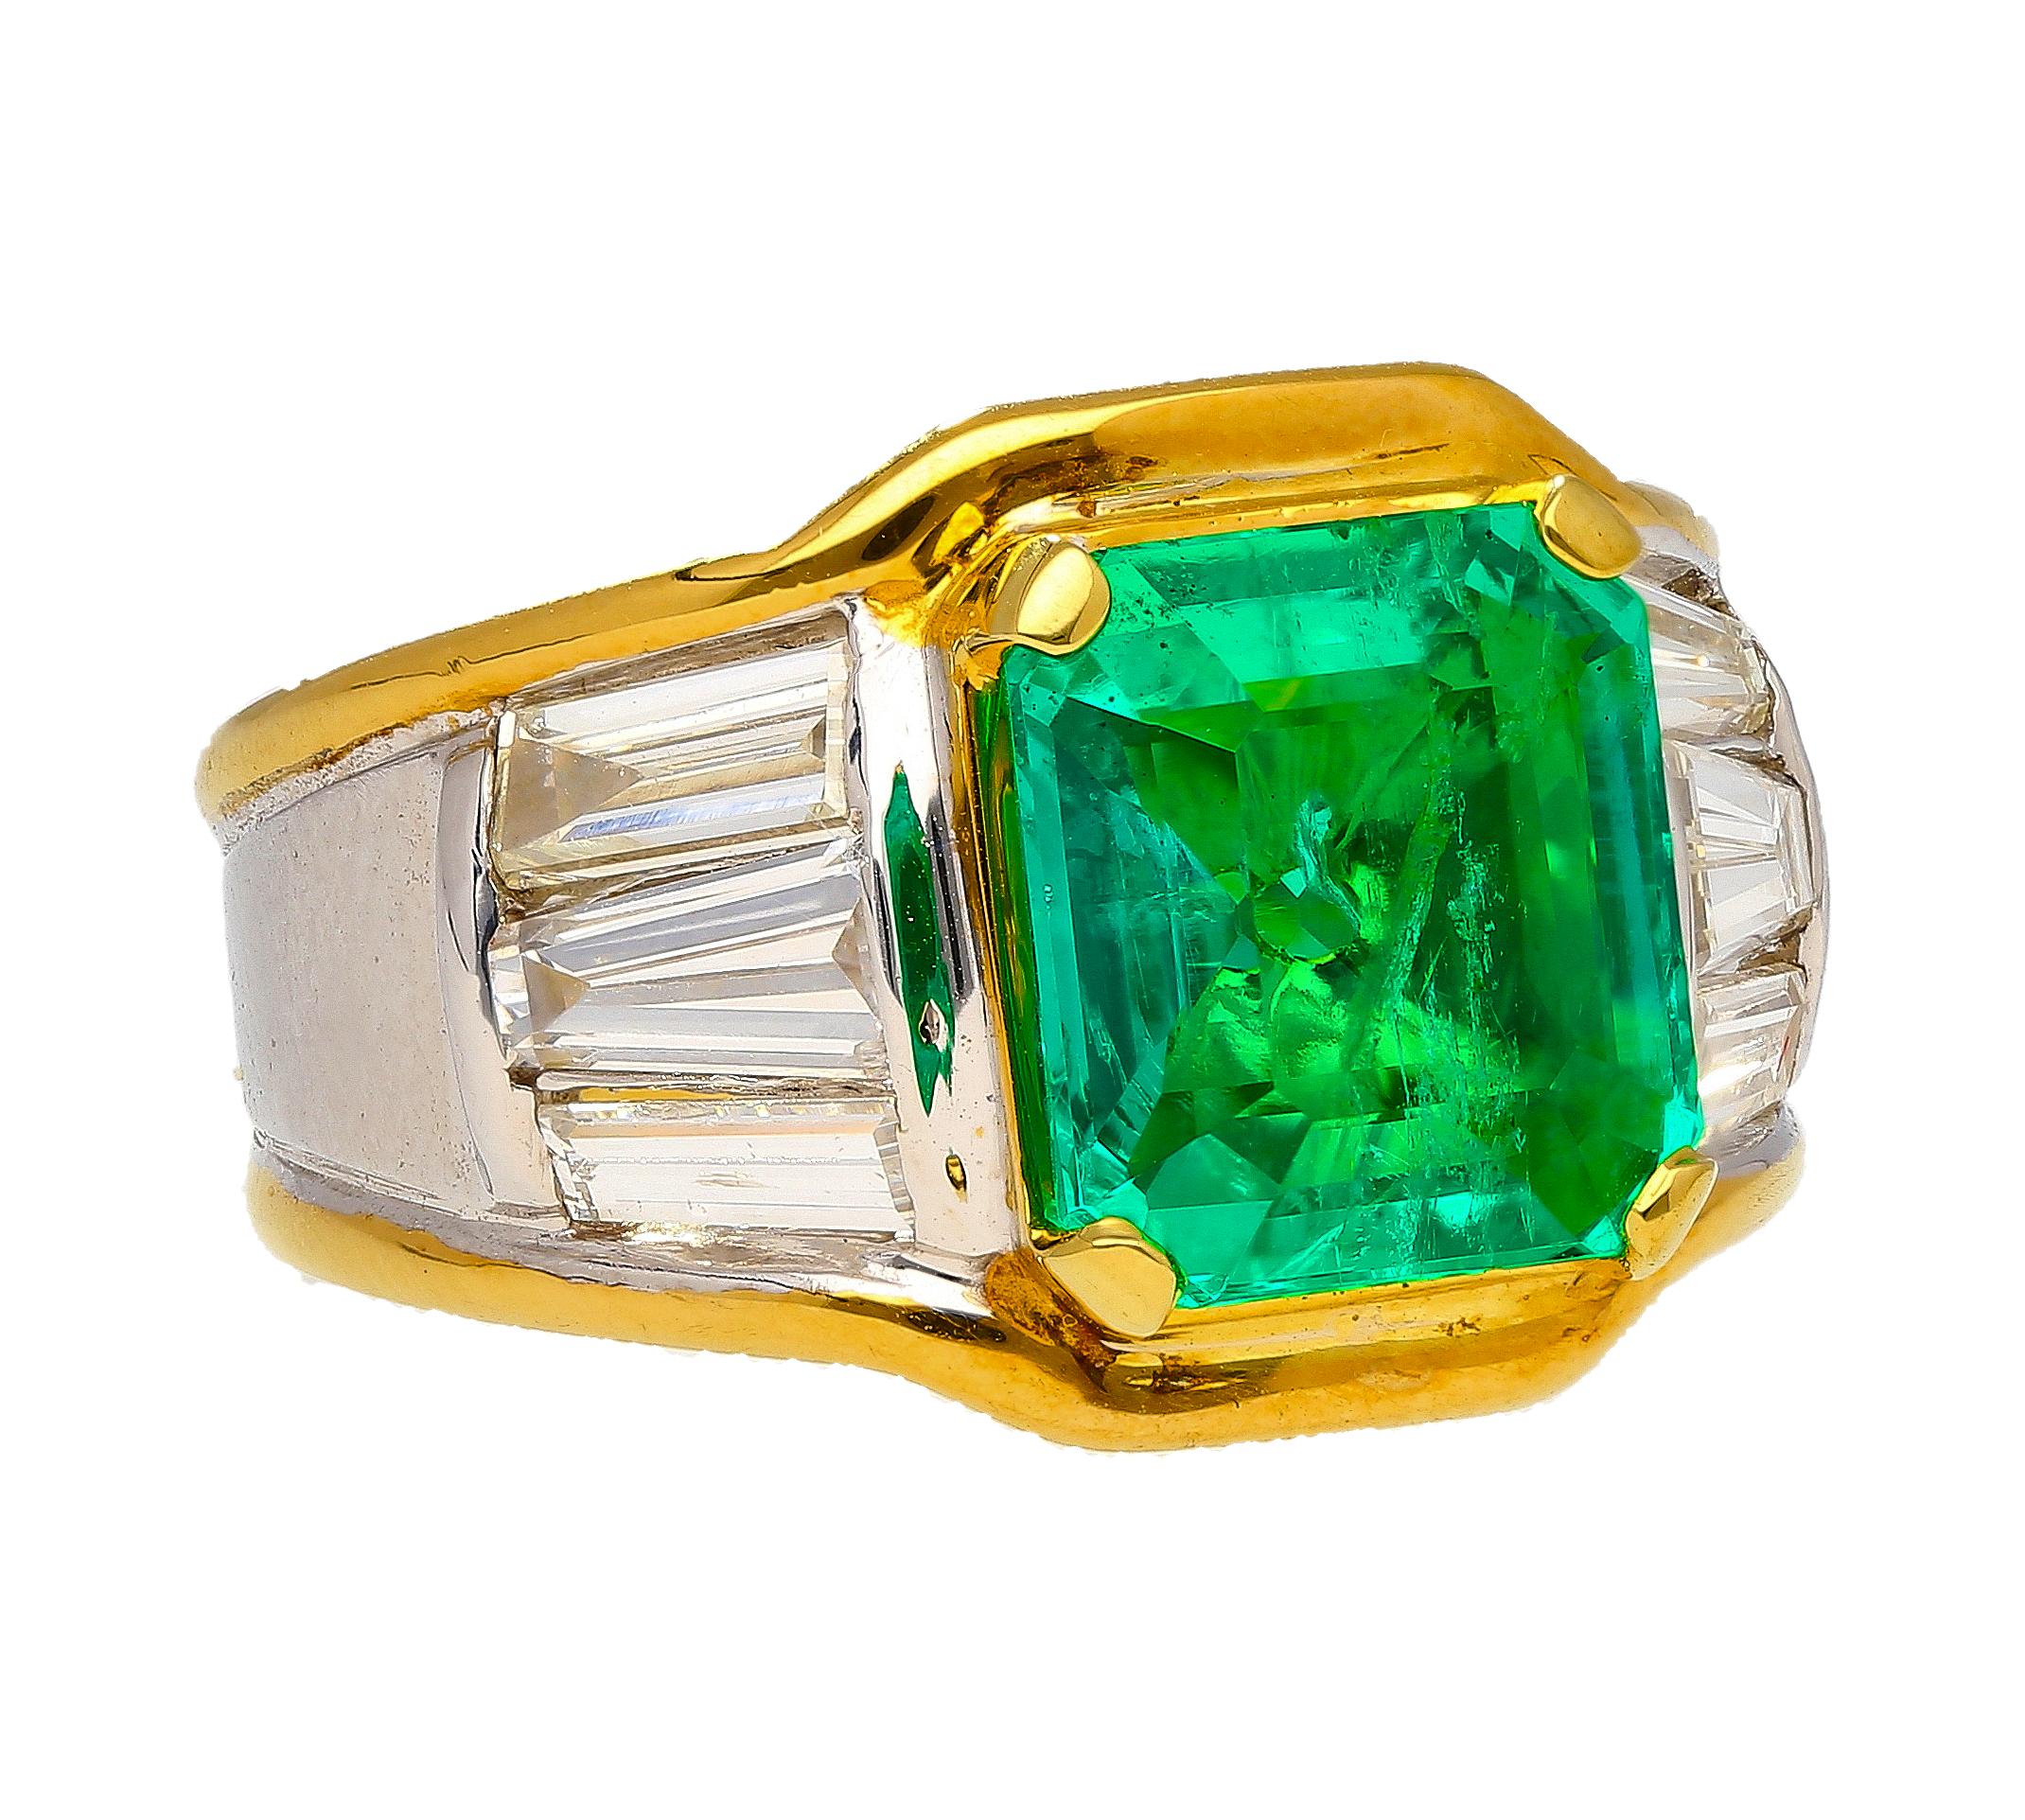 Vintage platinum 900 and 18k yellow gold two-tone multi gemstone ring with a single emerald and multiple diamonds. The center stone is a 3.16 carat vivid green Colombian emerald with insignificant oil treatment. A truly significant feat considering